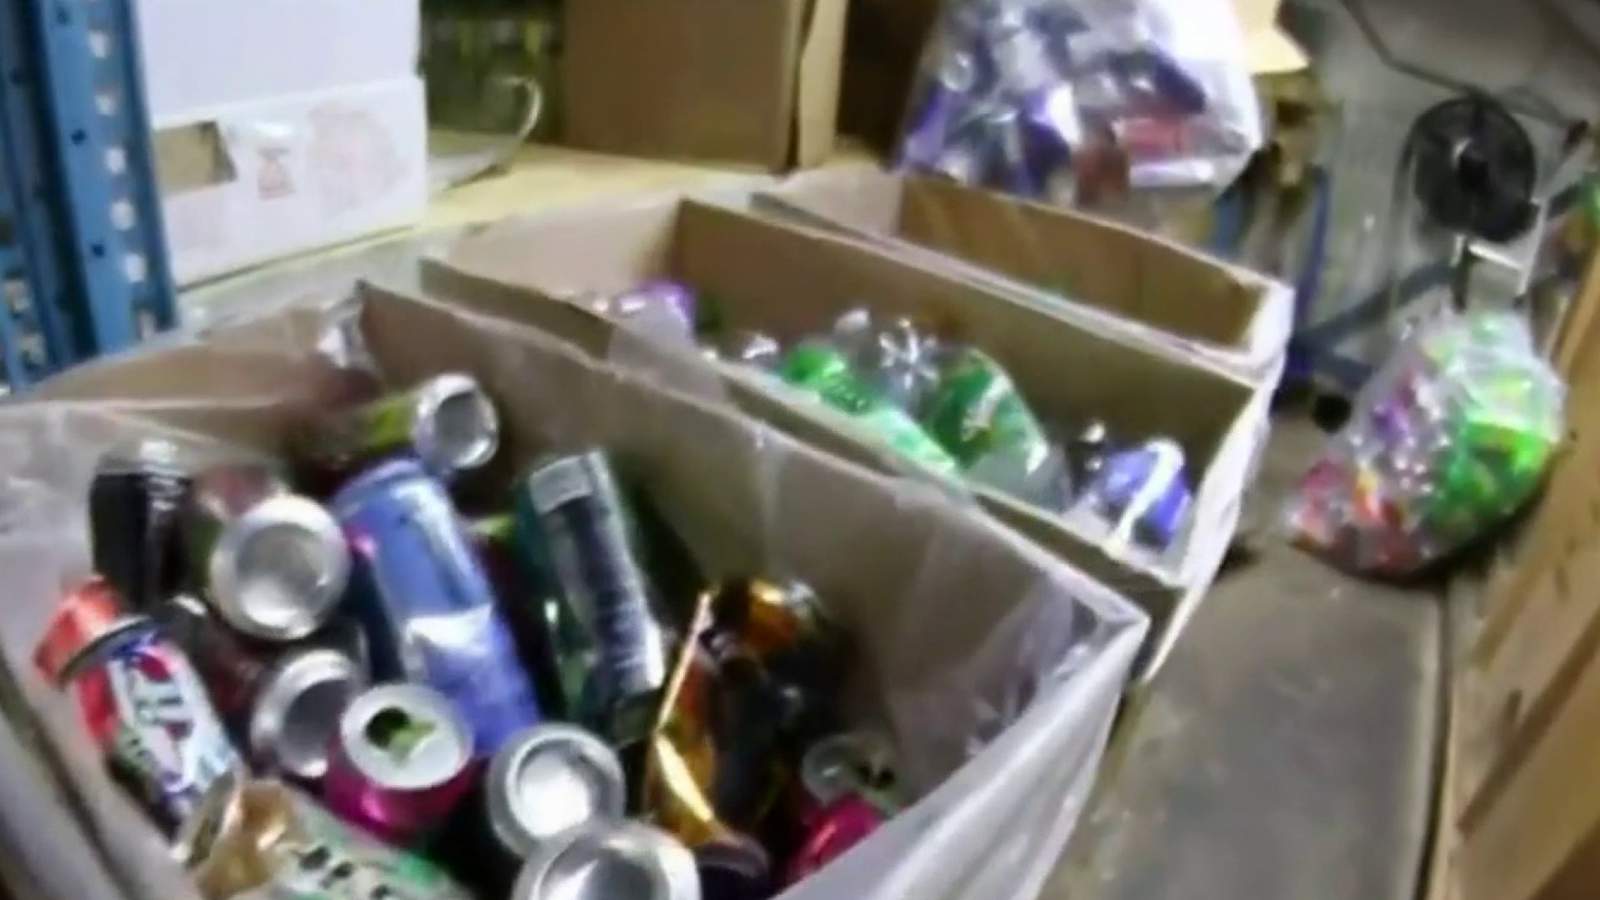 With bottle and can returns on hold, Michigan recyclers worry about massive backlog